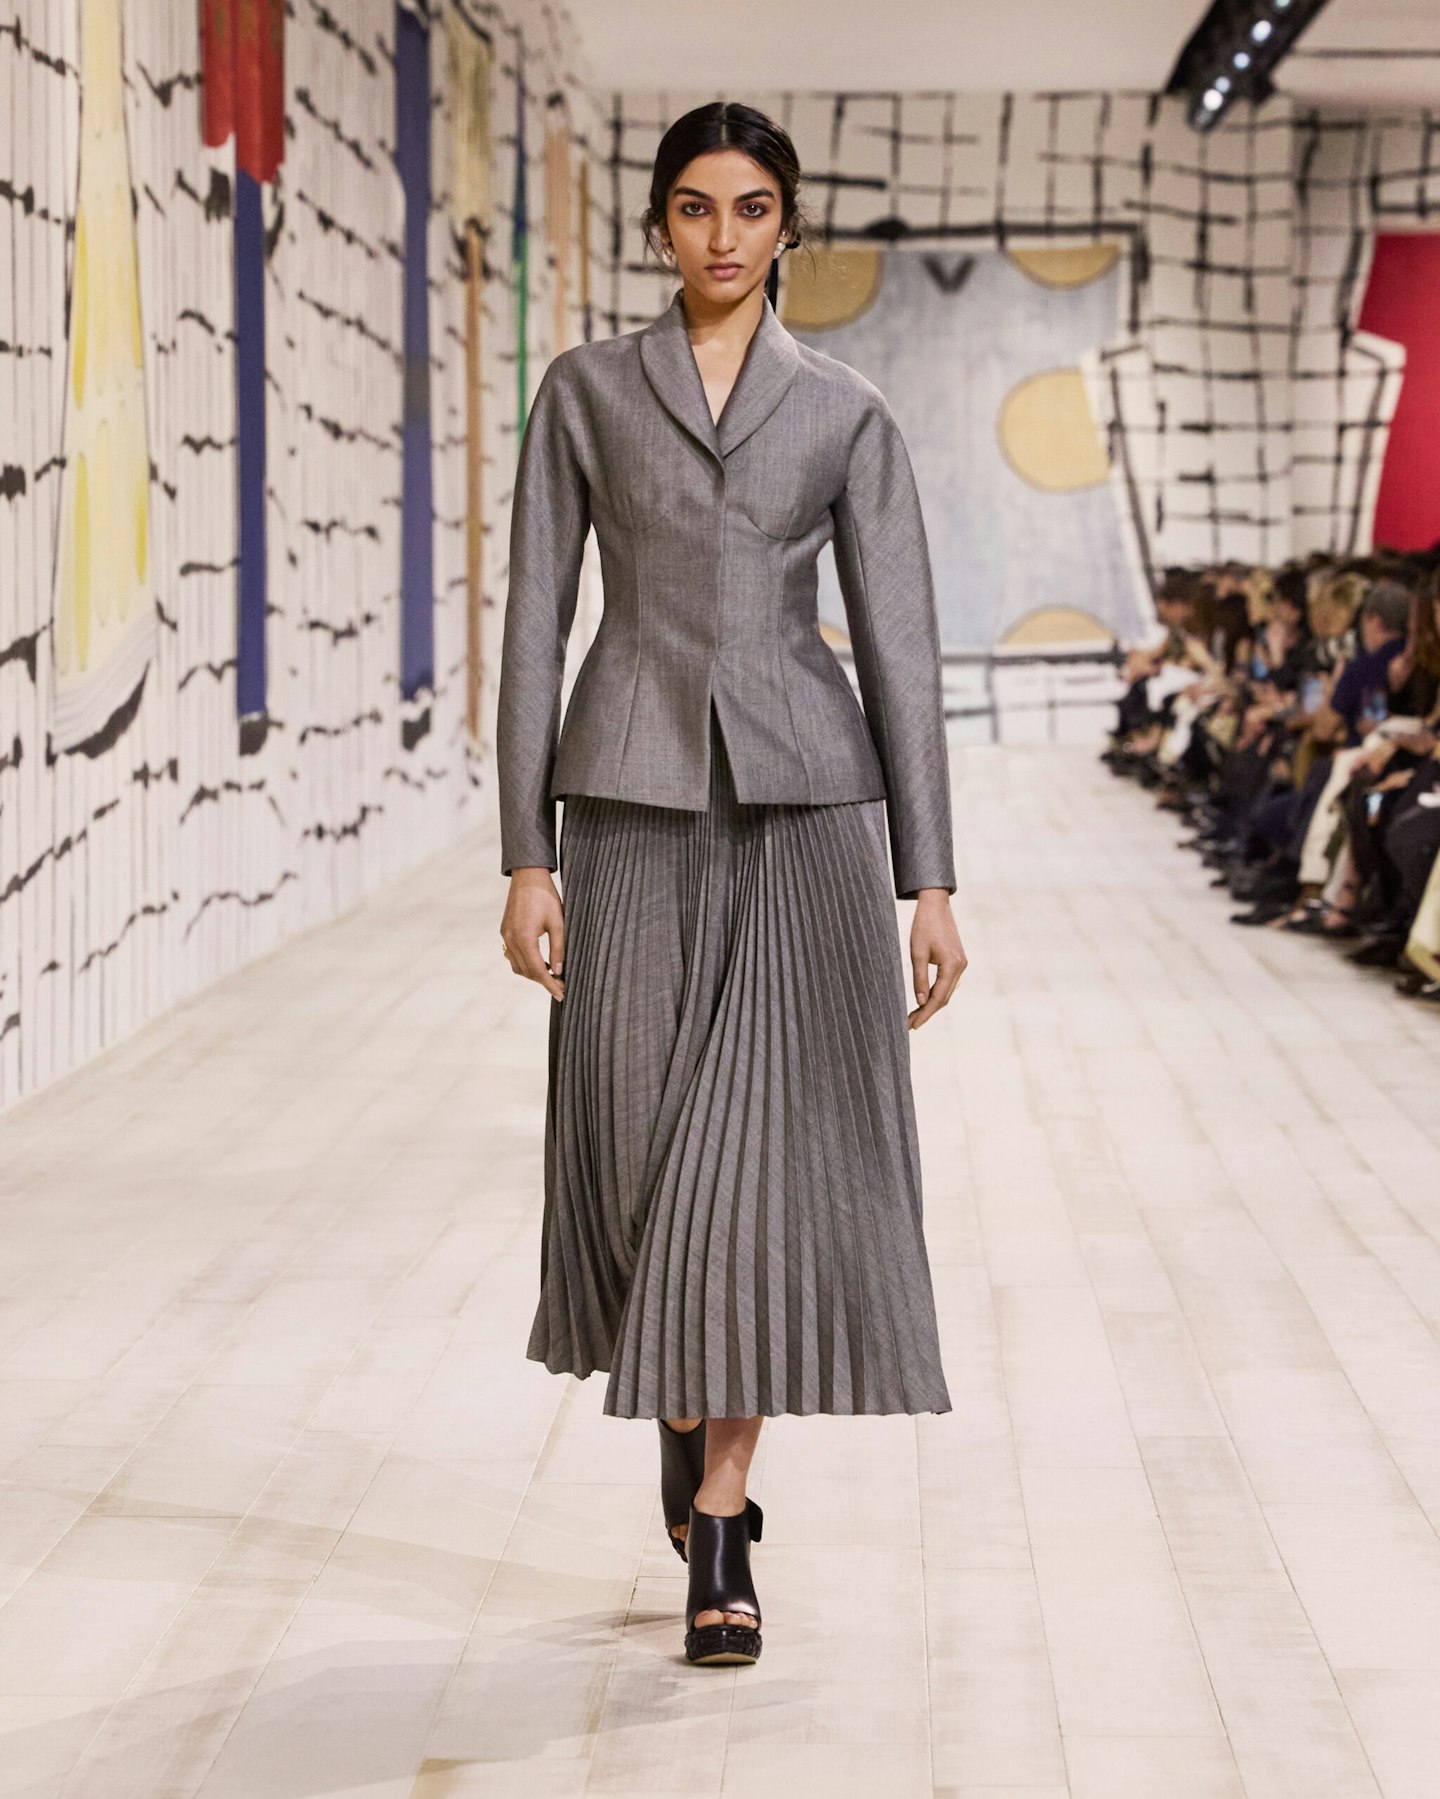 Dior's latest haute couture collection is a masterclass in enduring chic